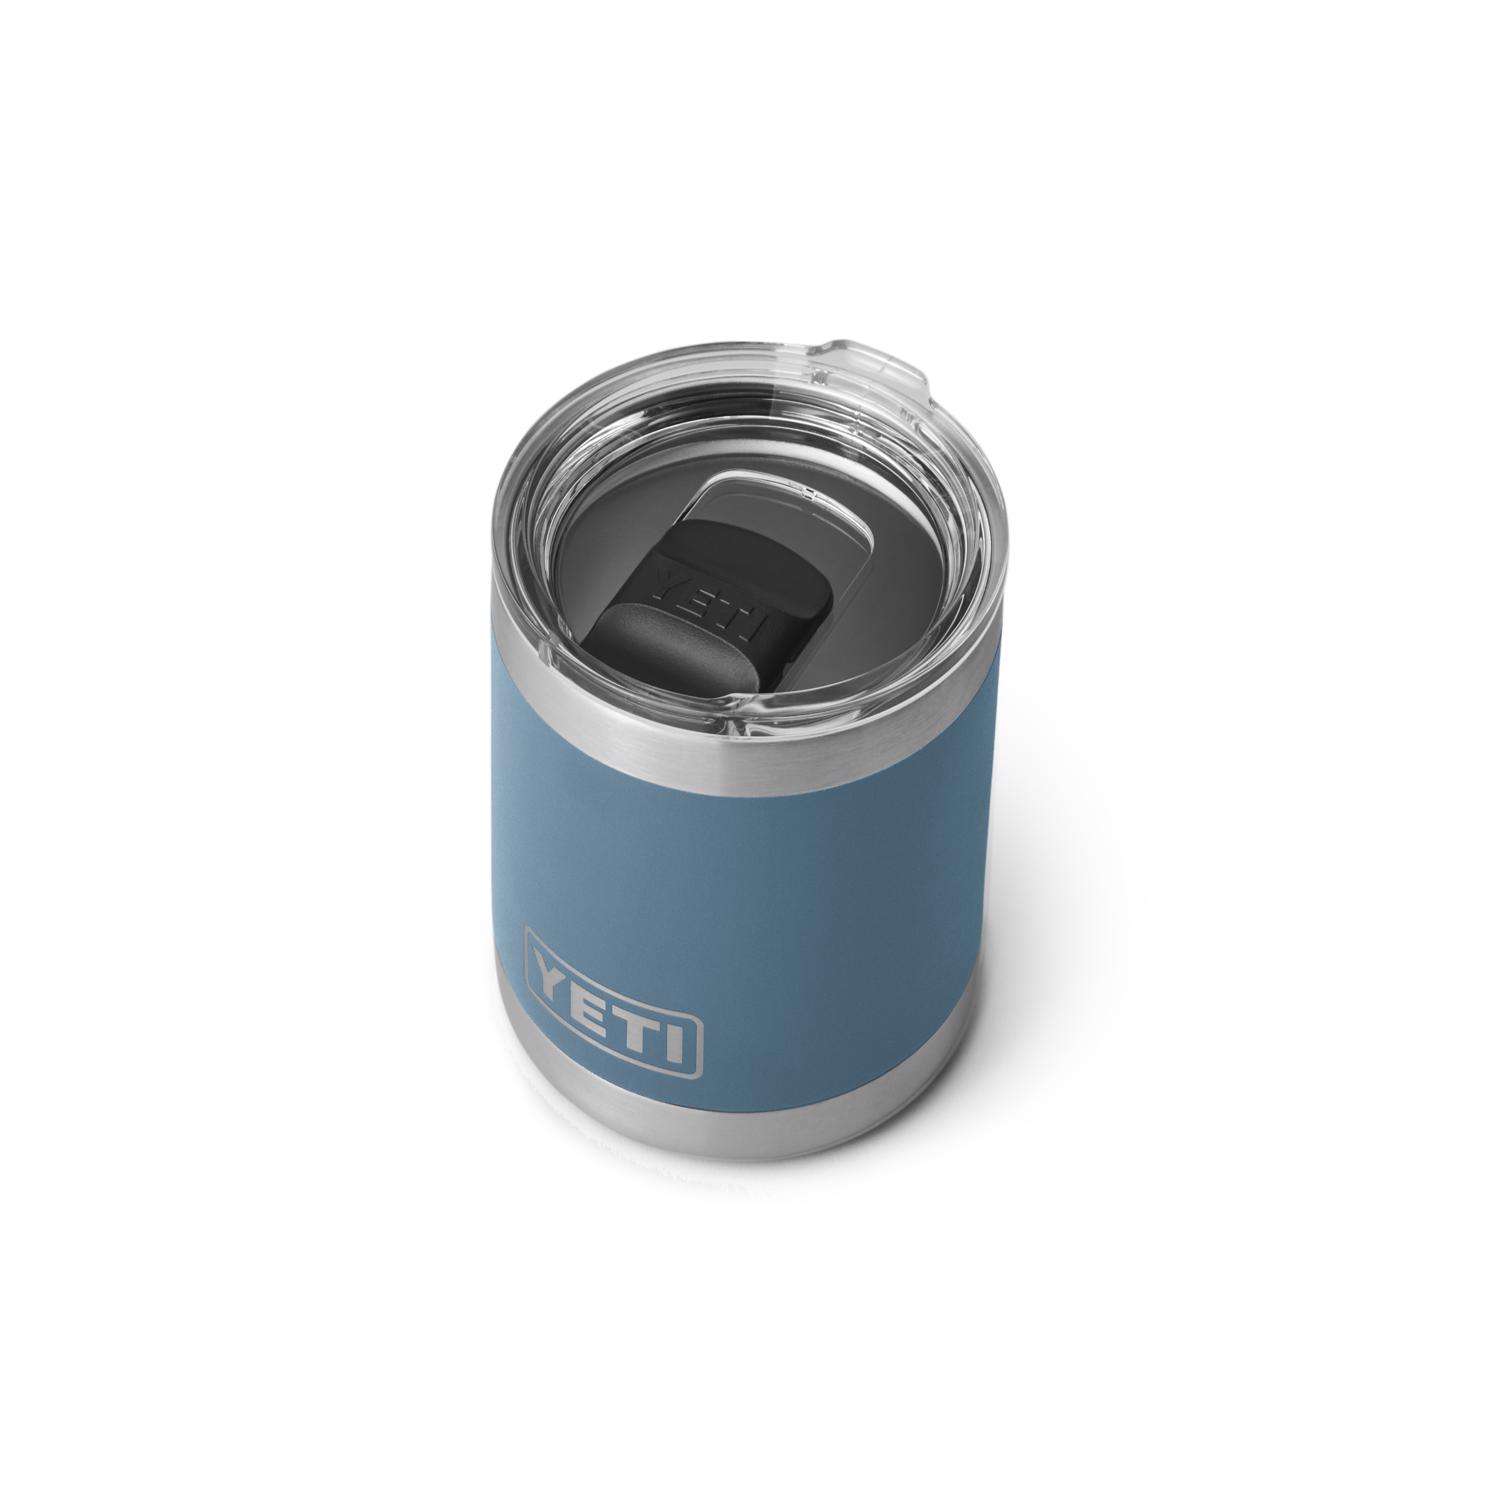 YETI Rambler 10oz Lowball with Magslider Lid - Nordic Blue